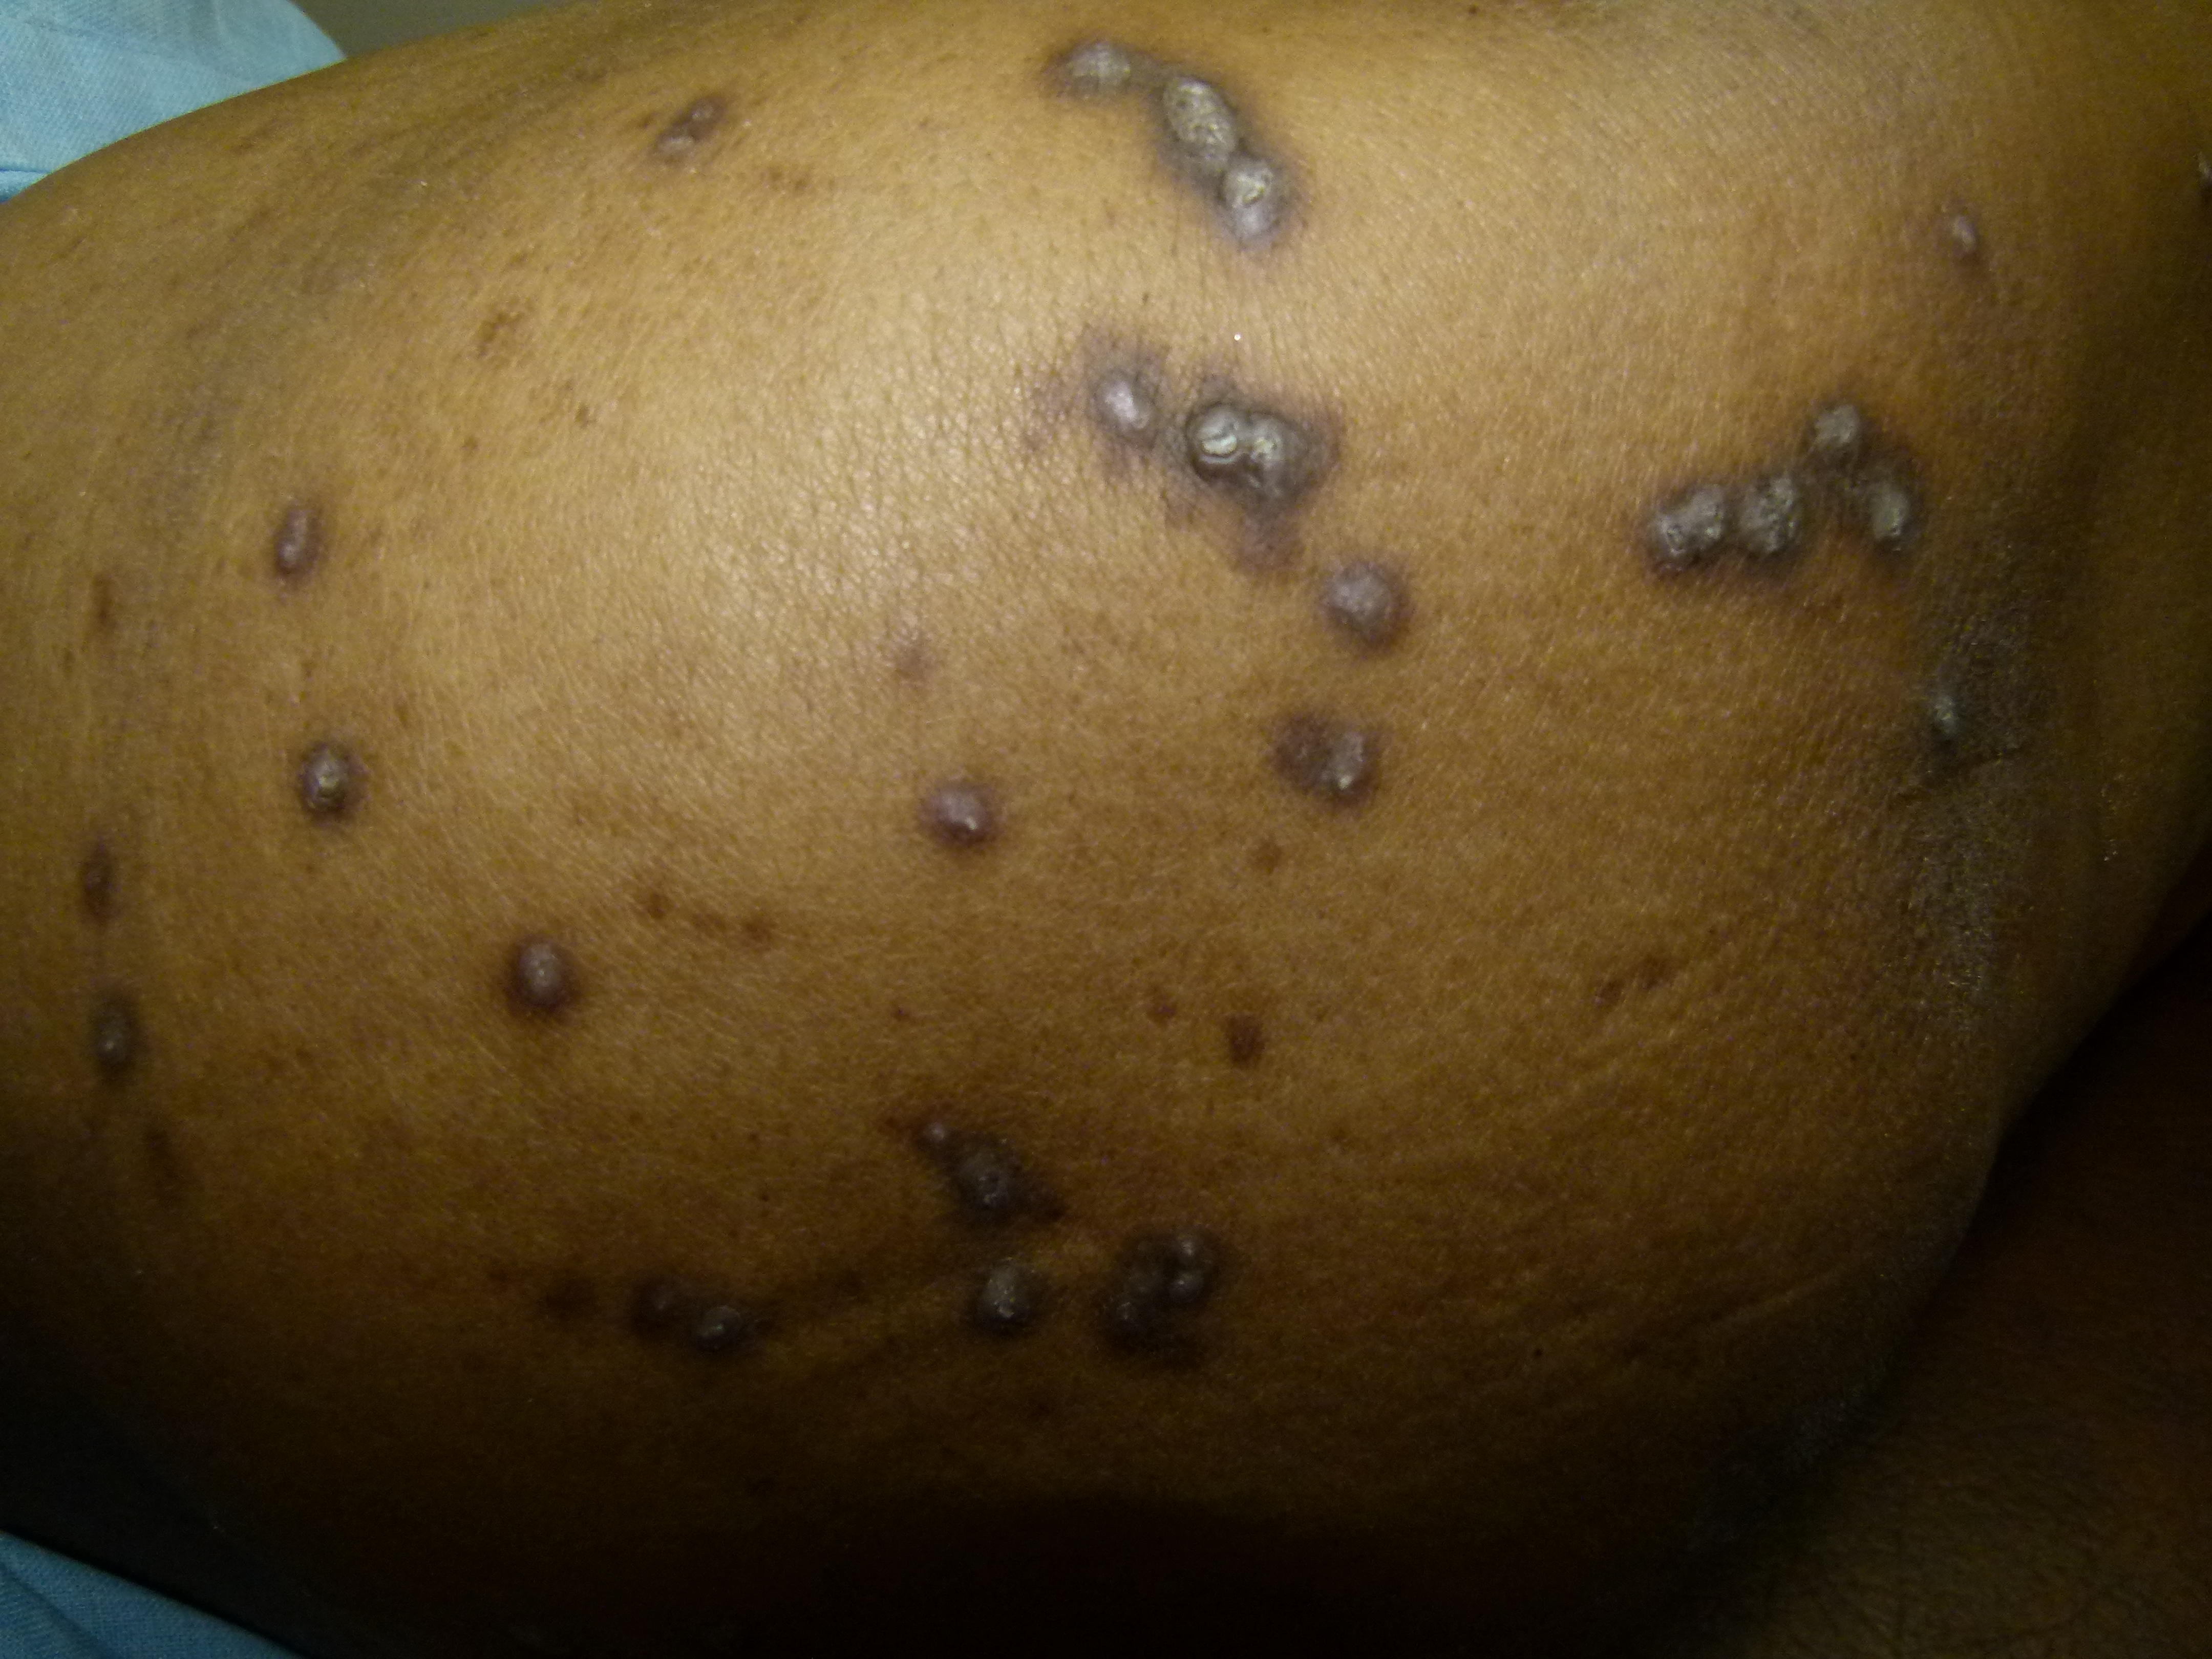 Acquired perforating disorder in a diabetic